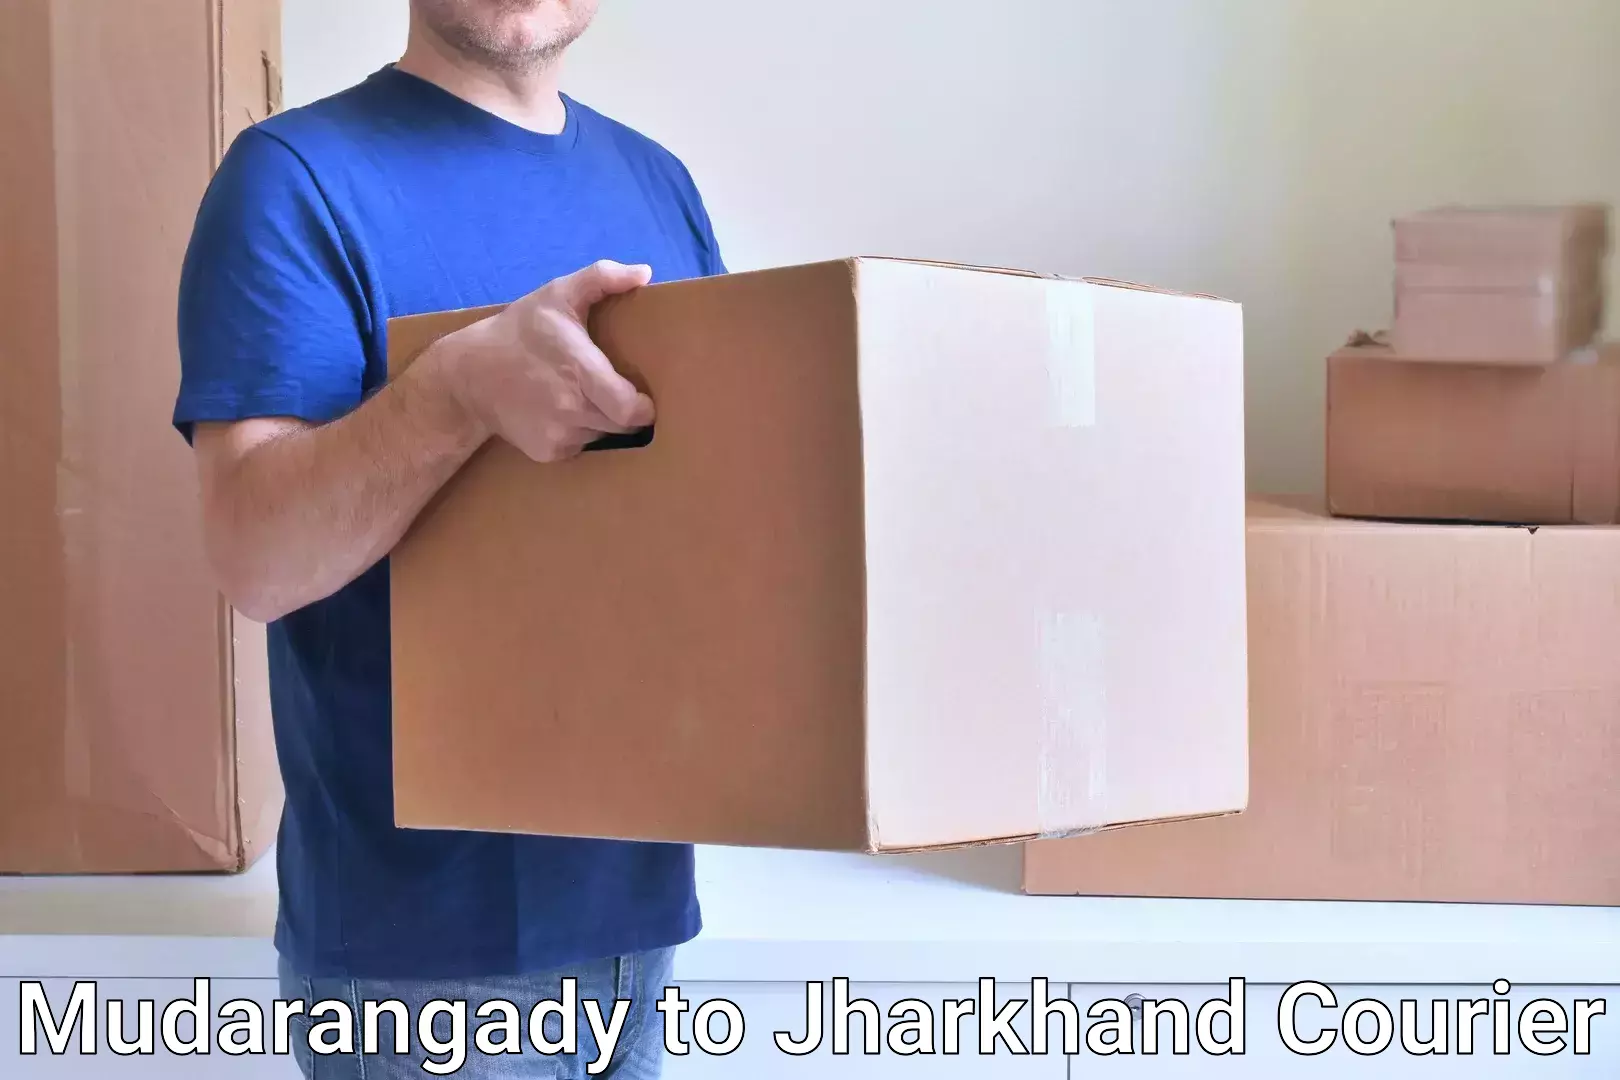 Courier service efficiency Mudarangady to Chandil